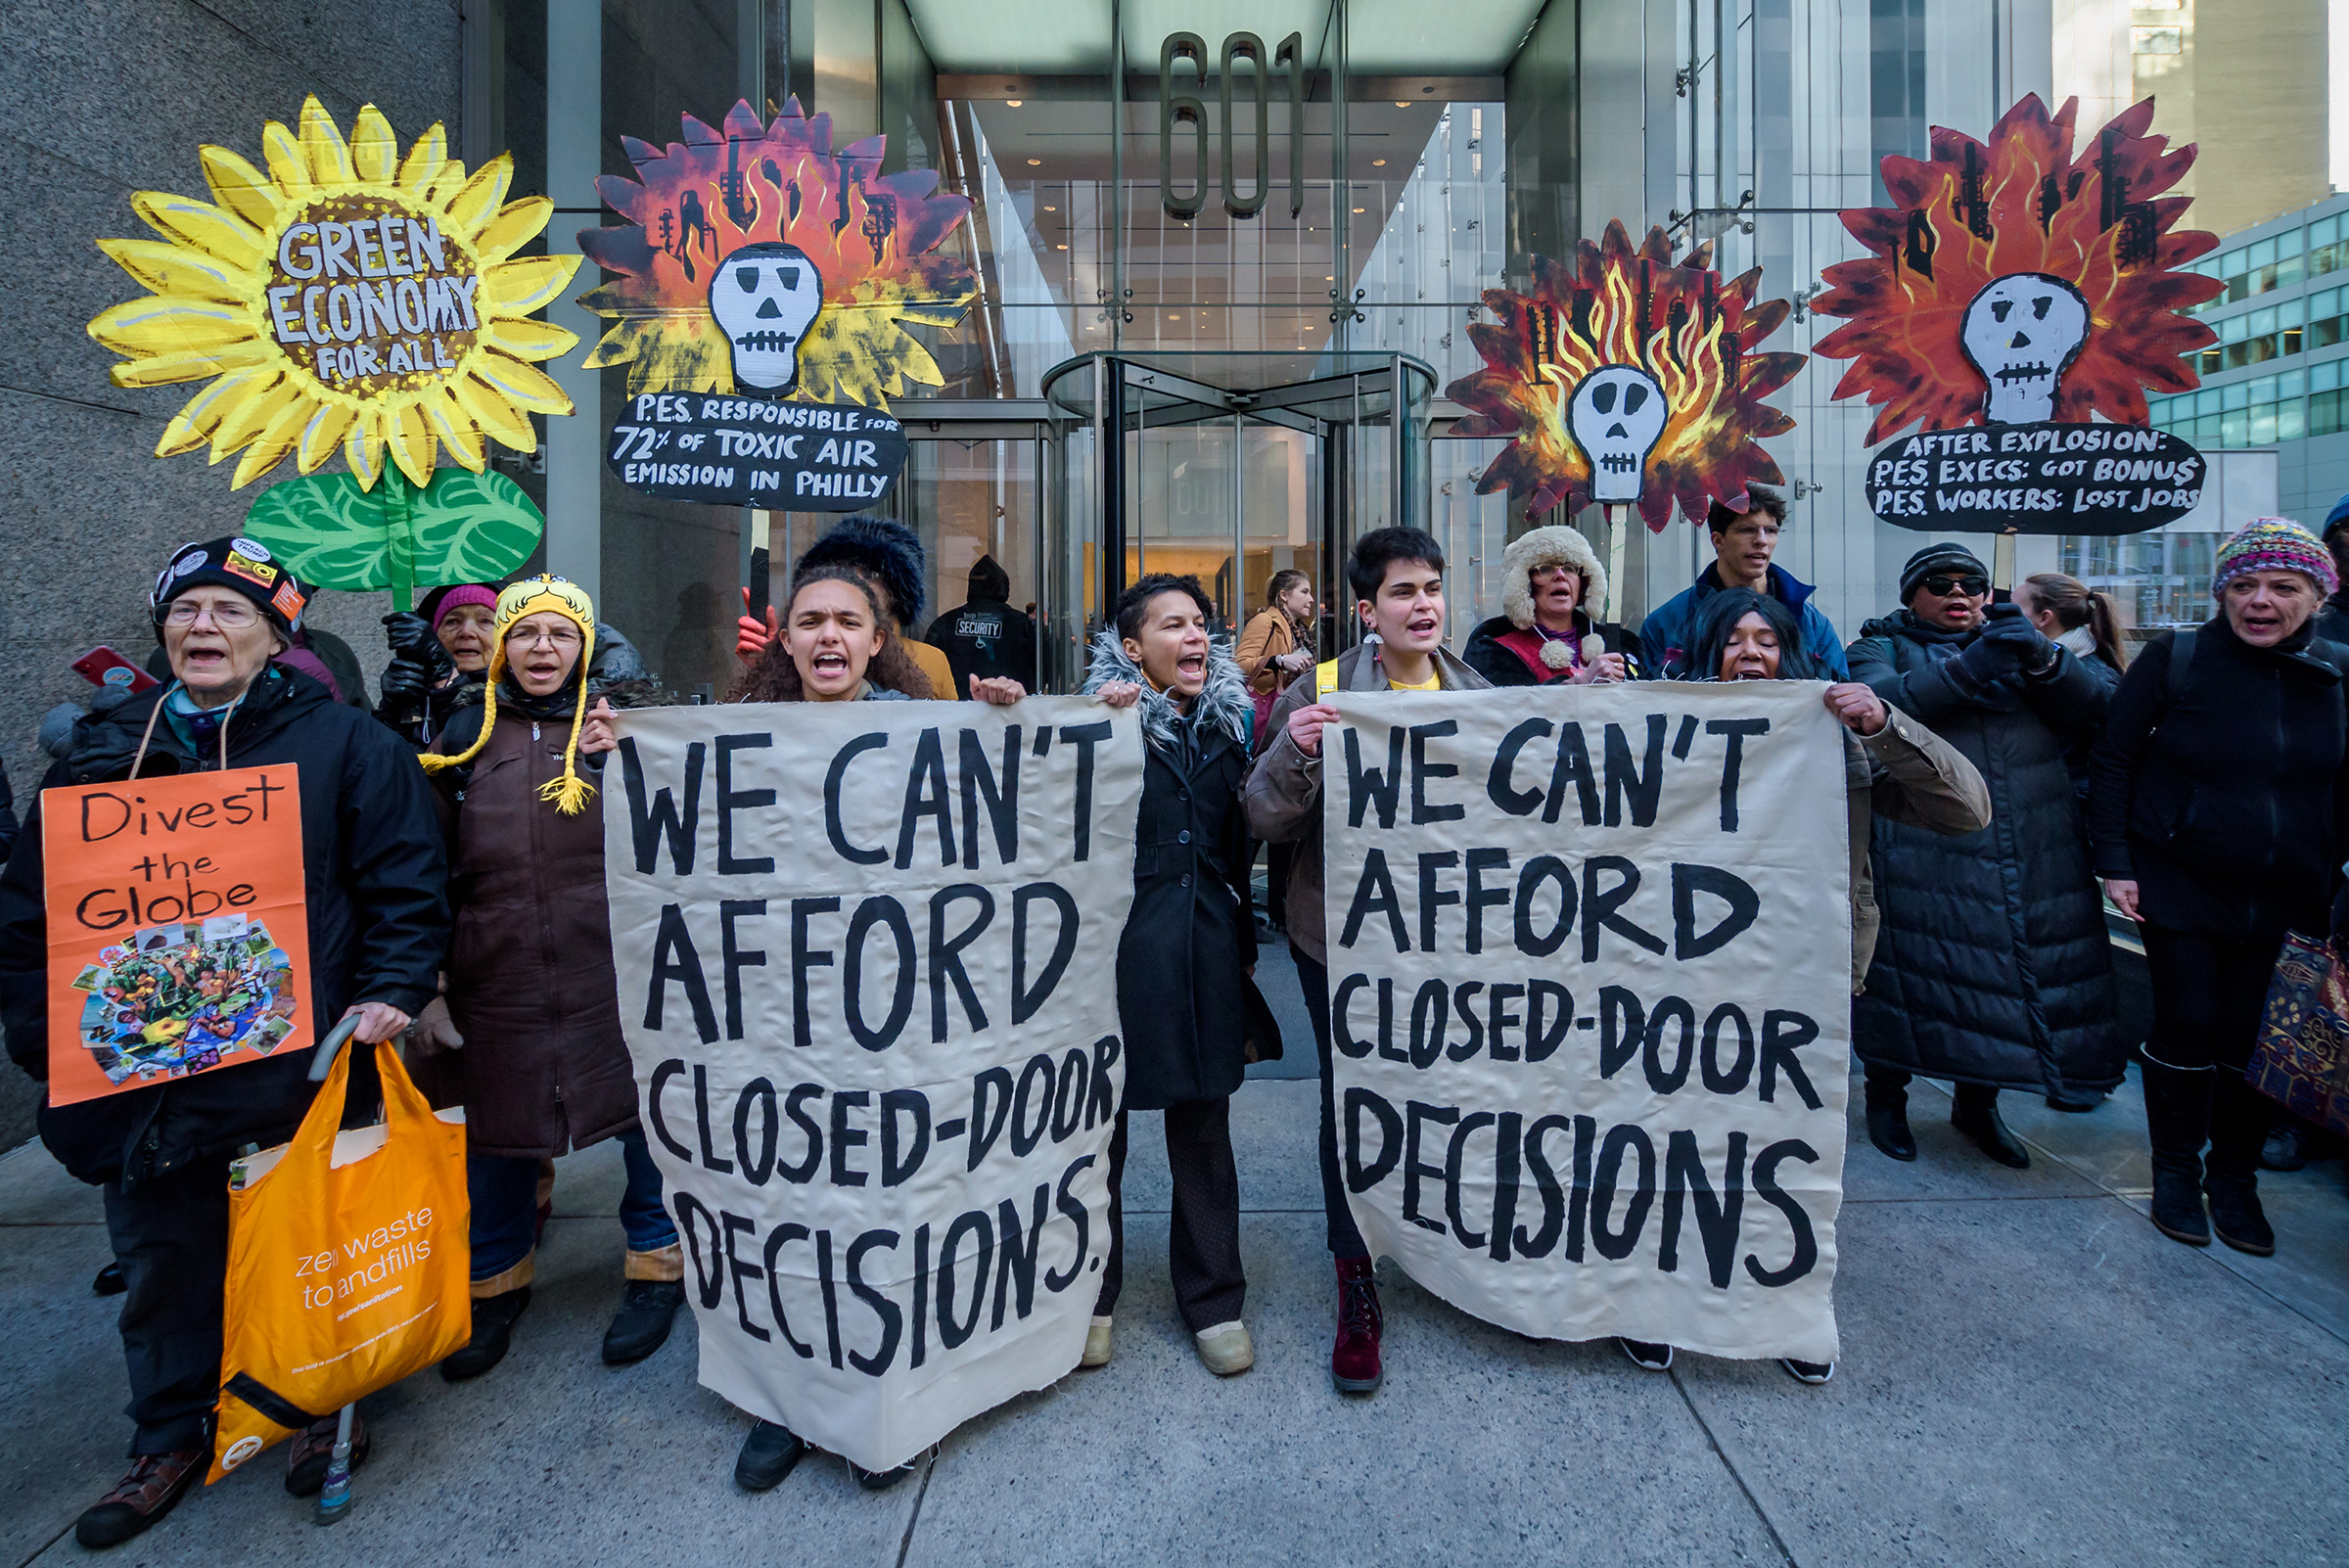 A Jan. 17 protest in opposition to the reopening of the Philadelphia Energy Solutions Refining Complex